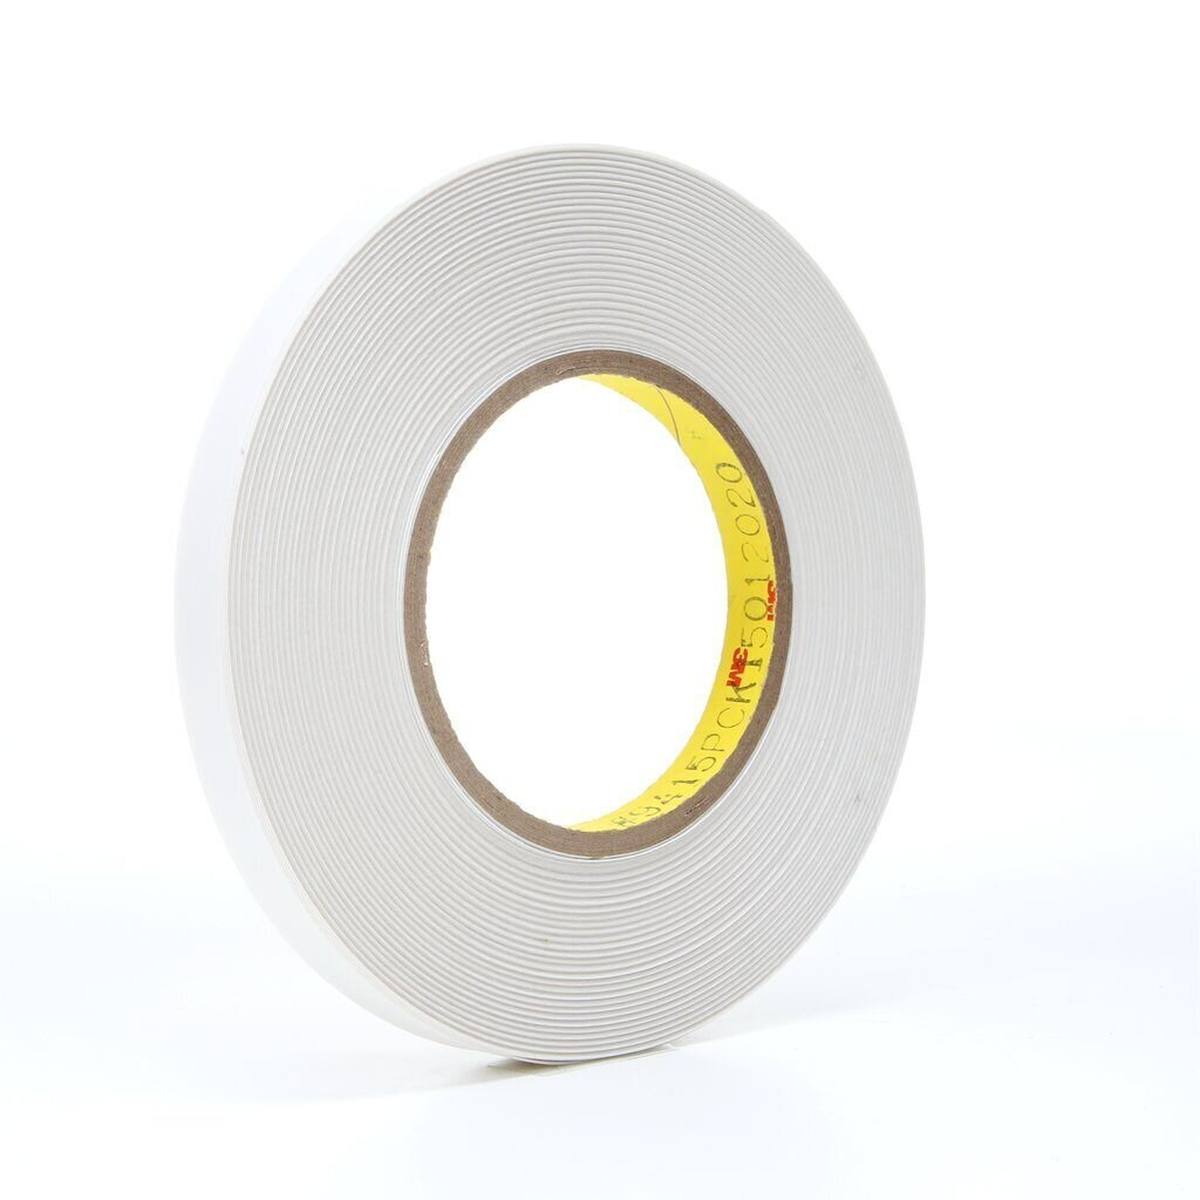 3M Double-sided adhesive tape with polyester backing 9415PC, translucent, 12.7 mm x 66 m, 0.05 mm